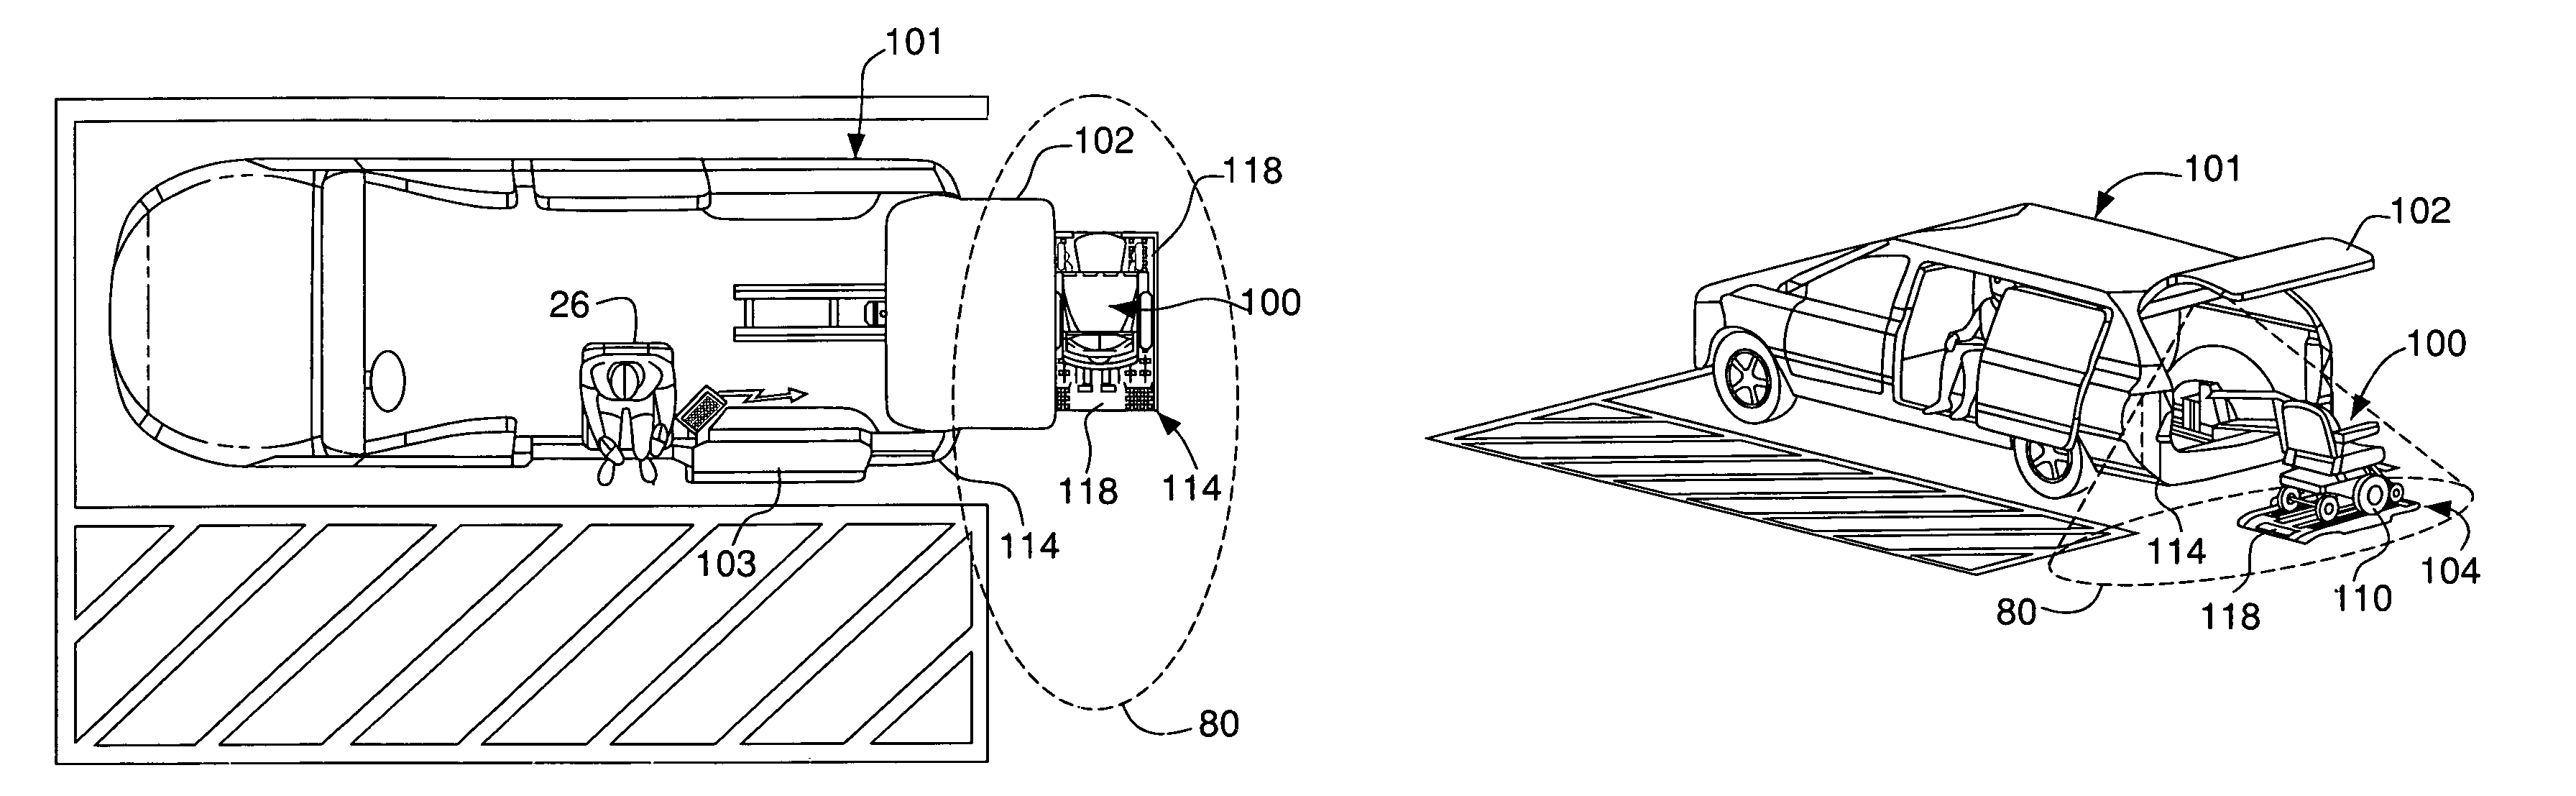 System for storing and retrieving a personal-transportation vehicle